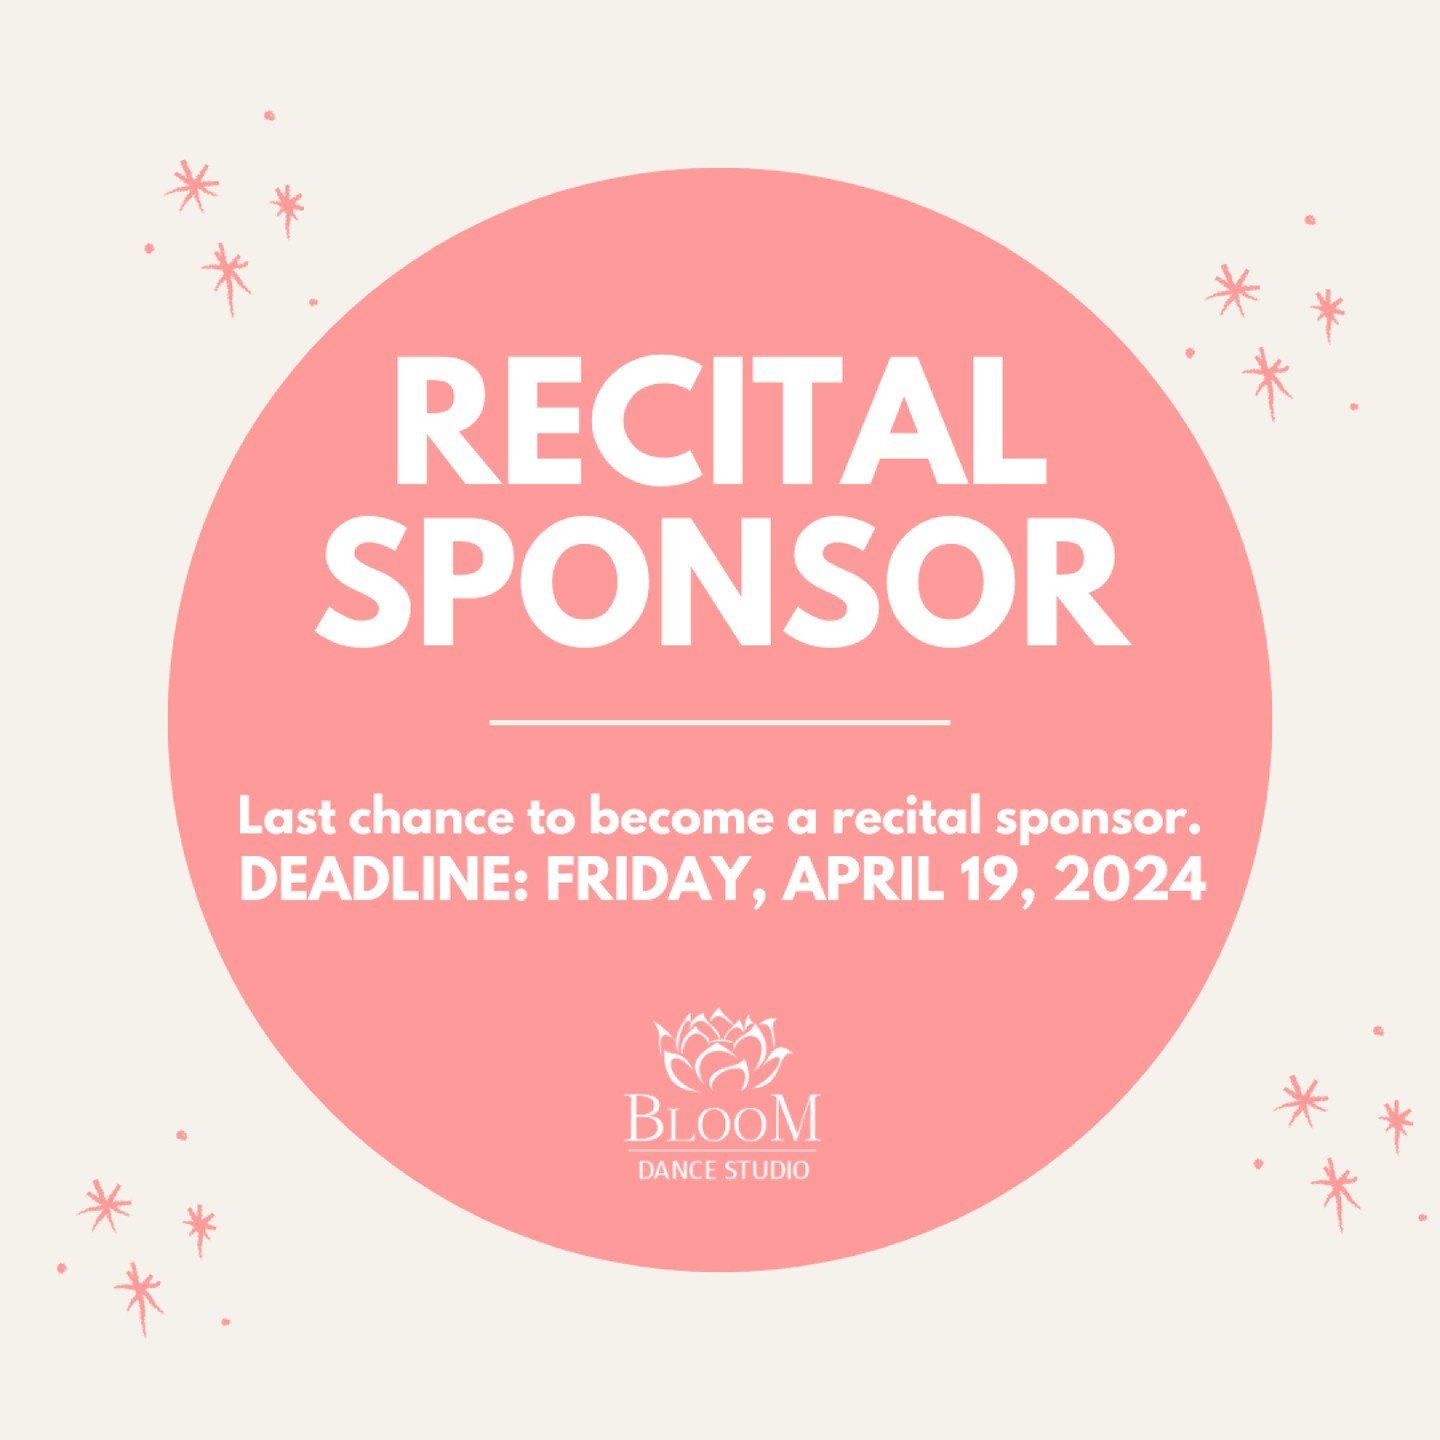 Business Owners! Do you want to get the word out about your products and services to our Bloom community? Become a Bloom Recital Sponsor!

OUR RECITAL SPONSORS WILL RECEIVE:
- Event Slide Show: Your logo, business name and website will be shown befor